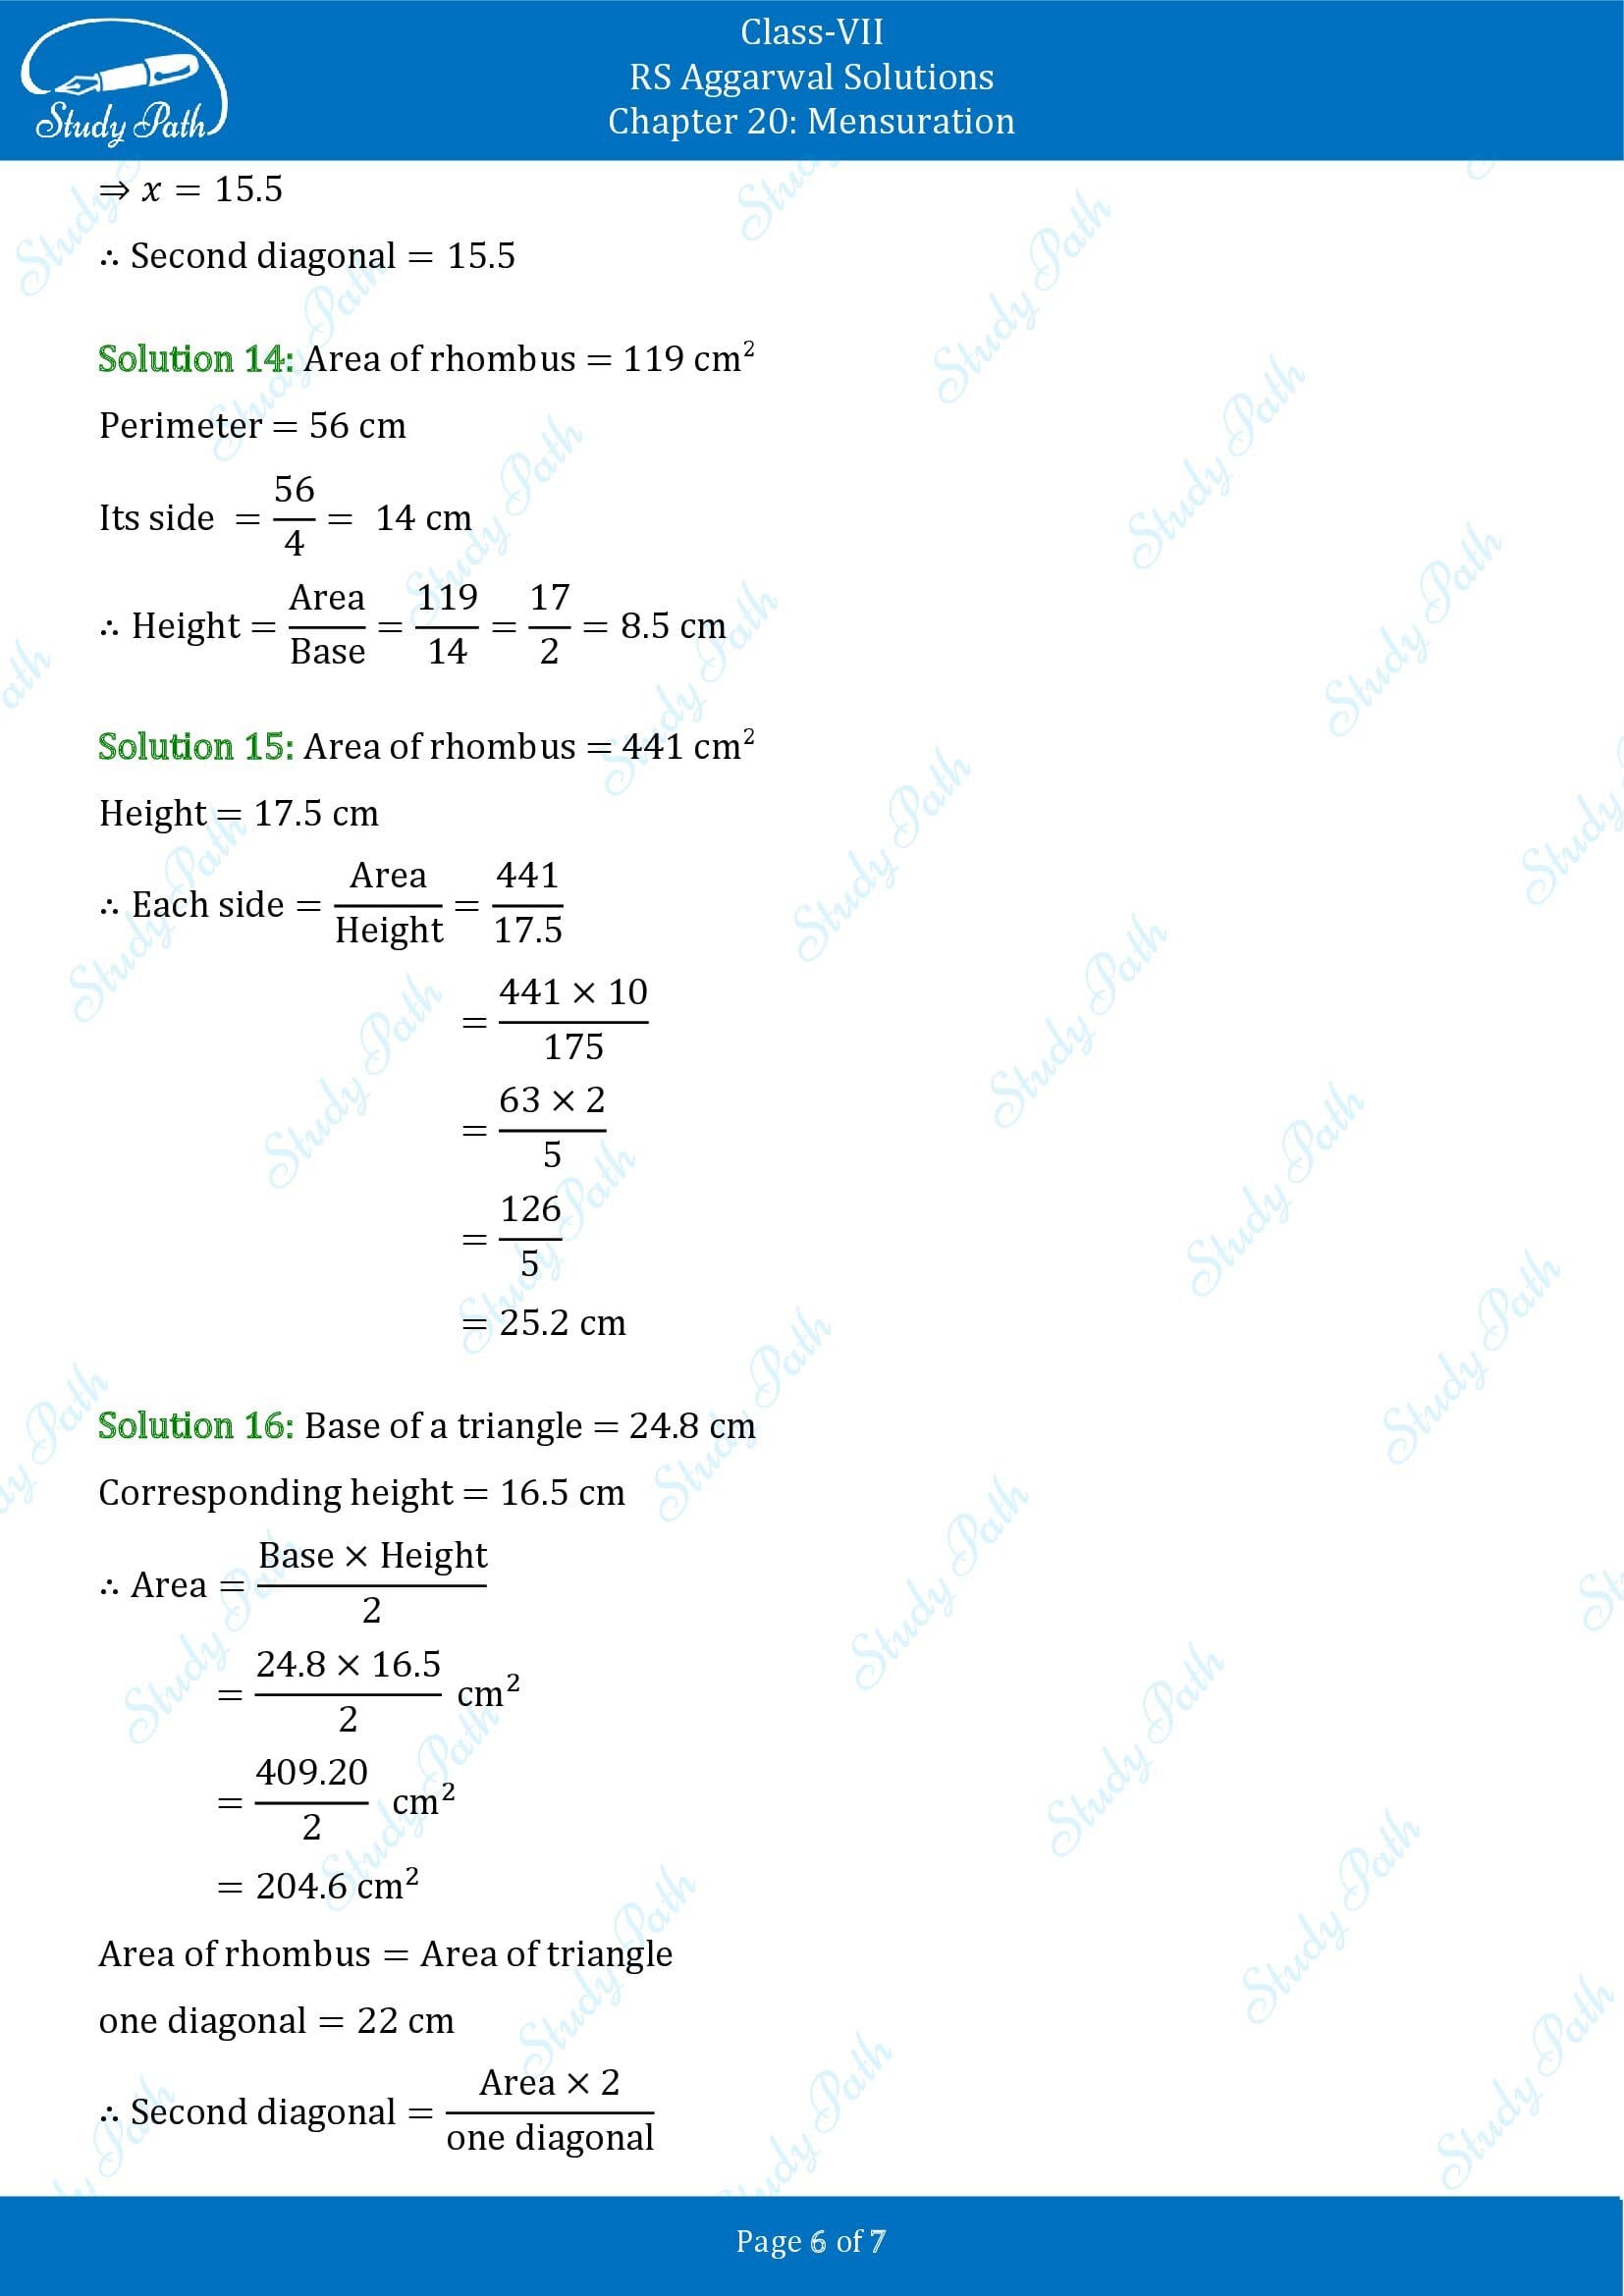 RS Aggarwal Solutions Class 7 Chapter 20 Mensuration Exercise 20C 00006